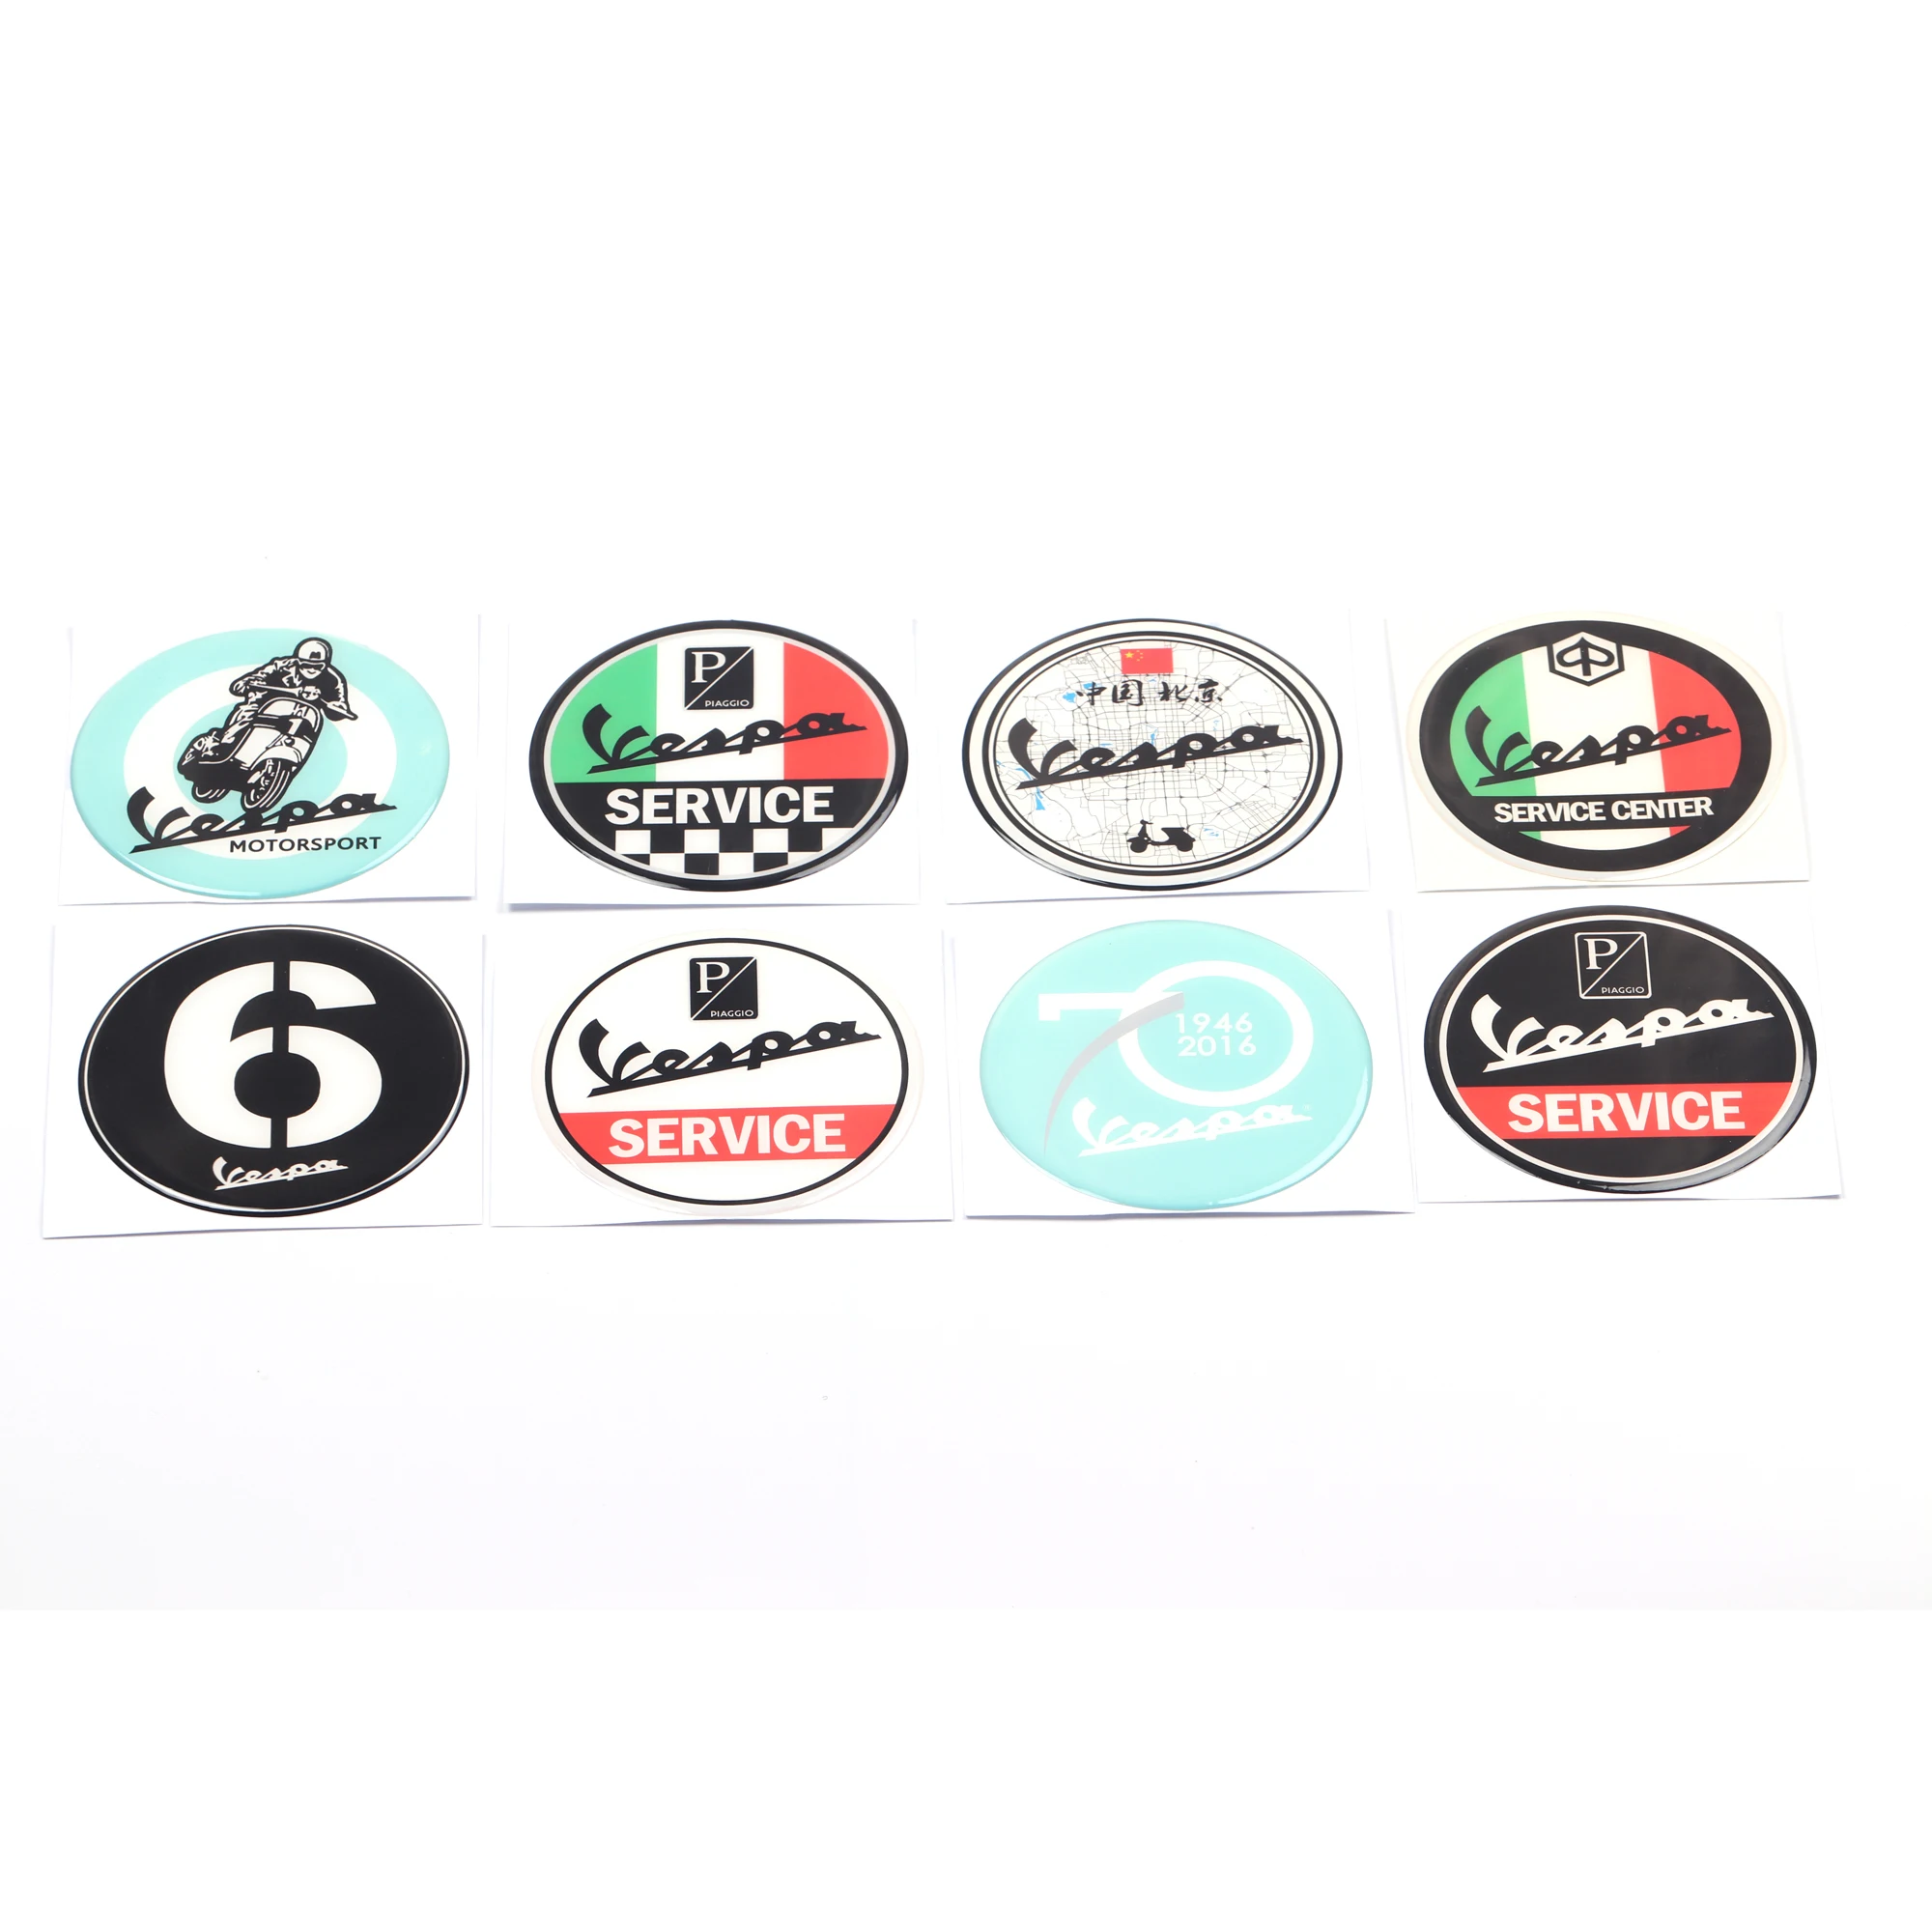 

For PIAGGIO VESPA GTS GTV LX LXV Sprint Primavera 50 125 150 200 250 300ie Motorcycle 3D Badge Emblem Magnet Stickers Decal Case